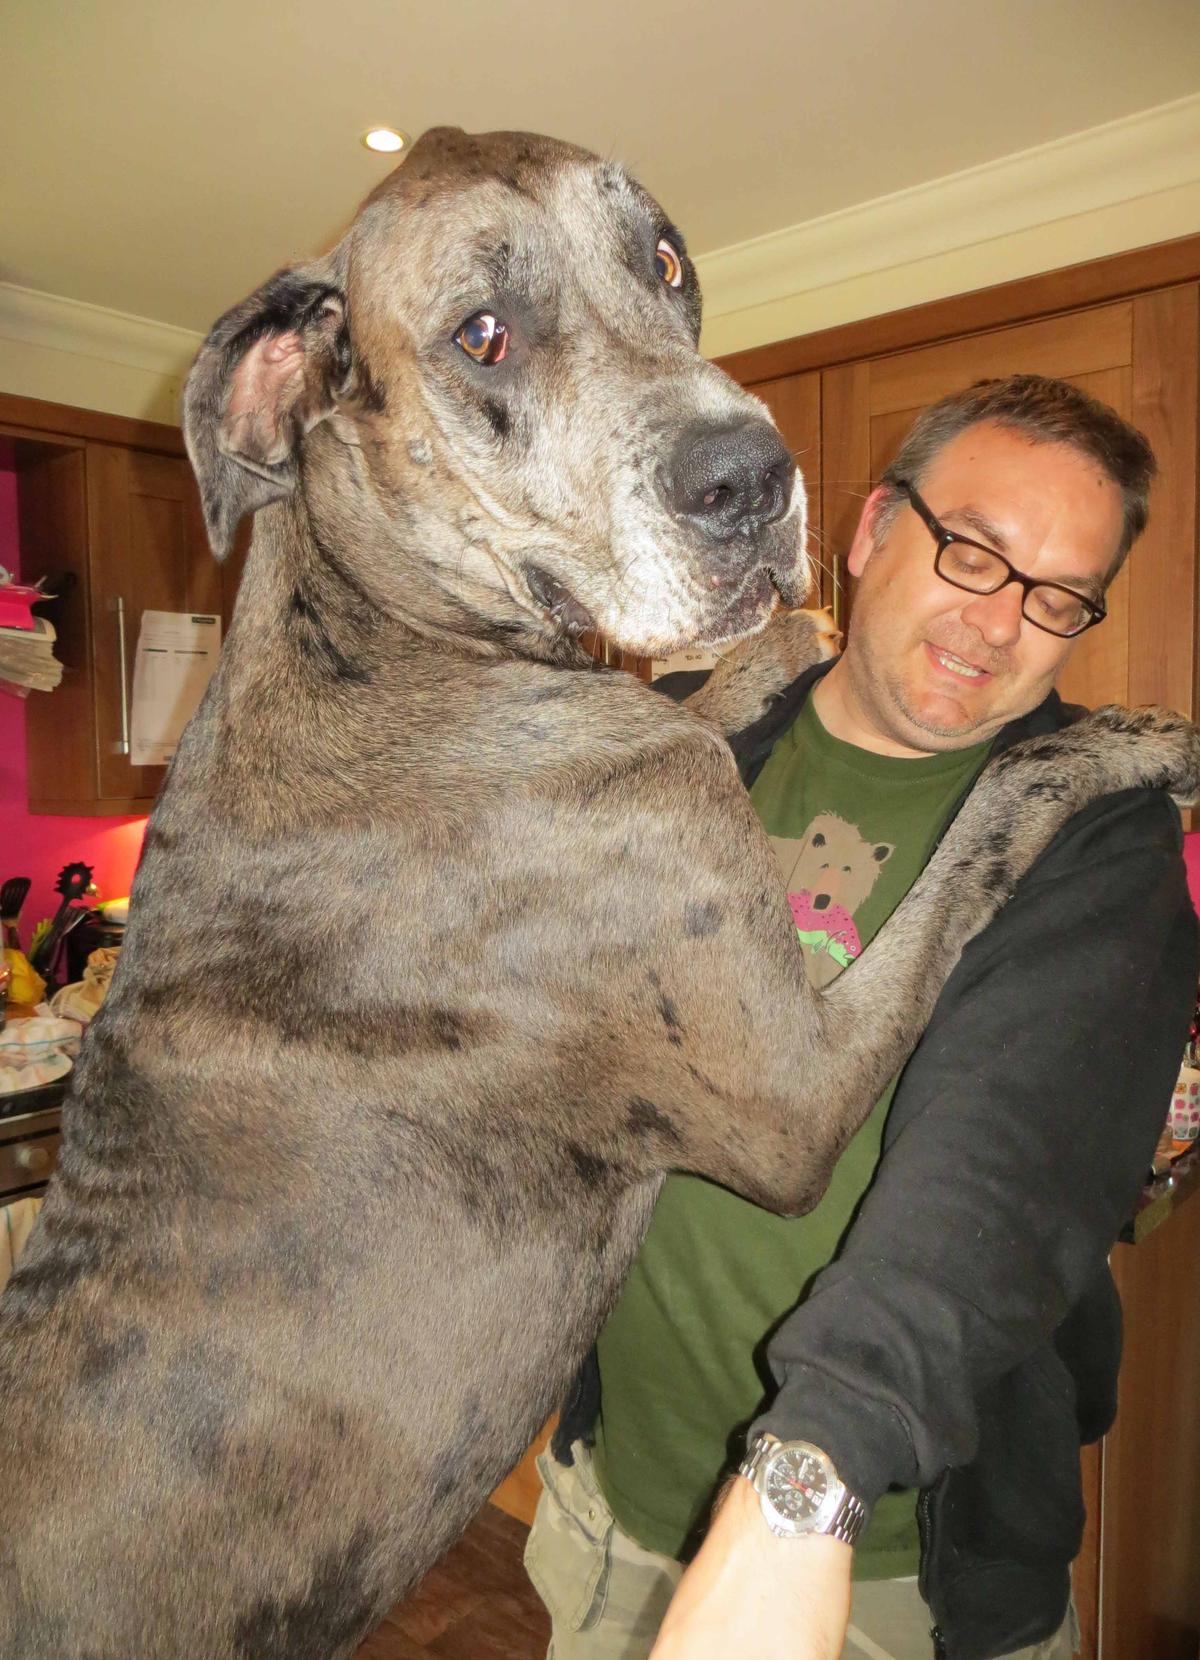 Freddy standing on his hind legs with paws on the shoulders of a family friend, Mark (Caters News)